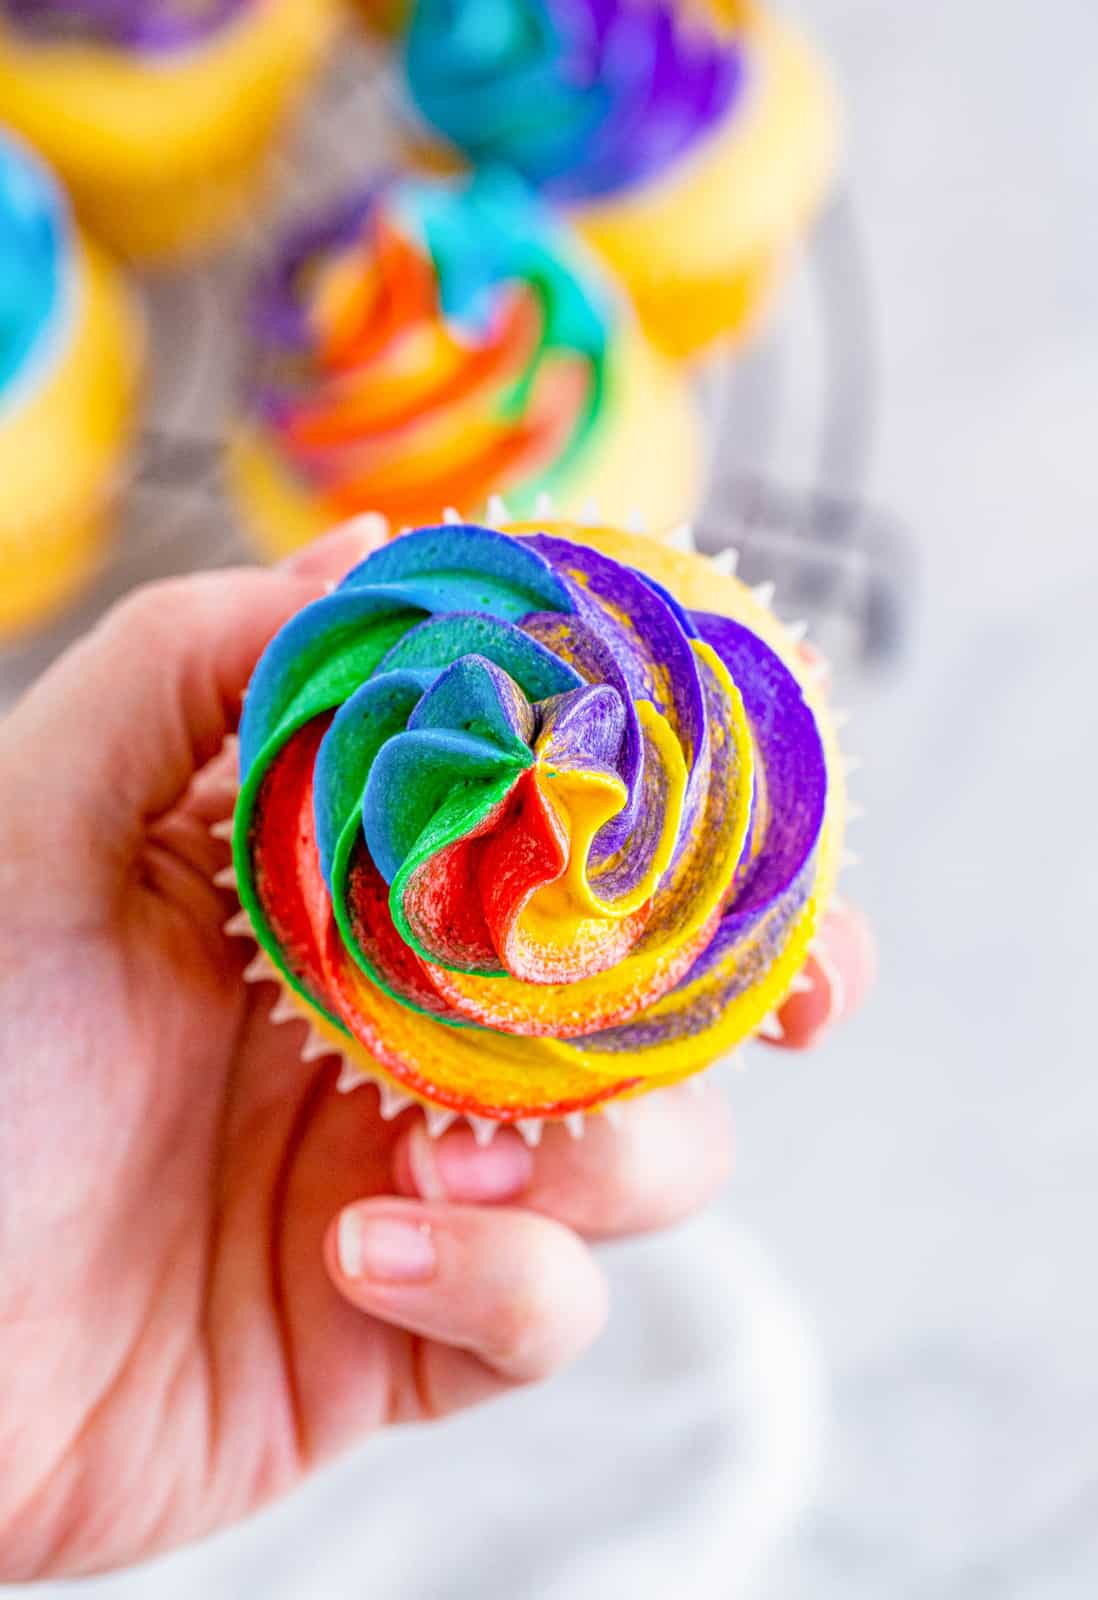 Hand holding up one cupcake showing the top swirls of Rainbow Frosting.